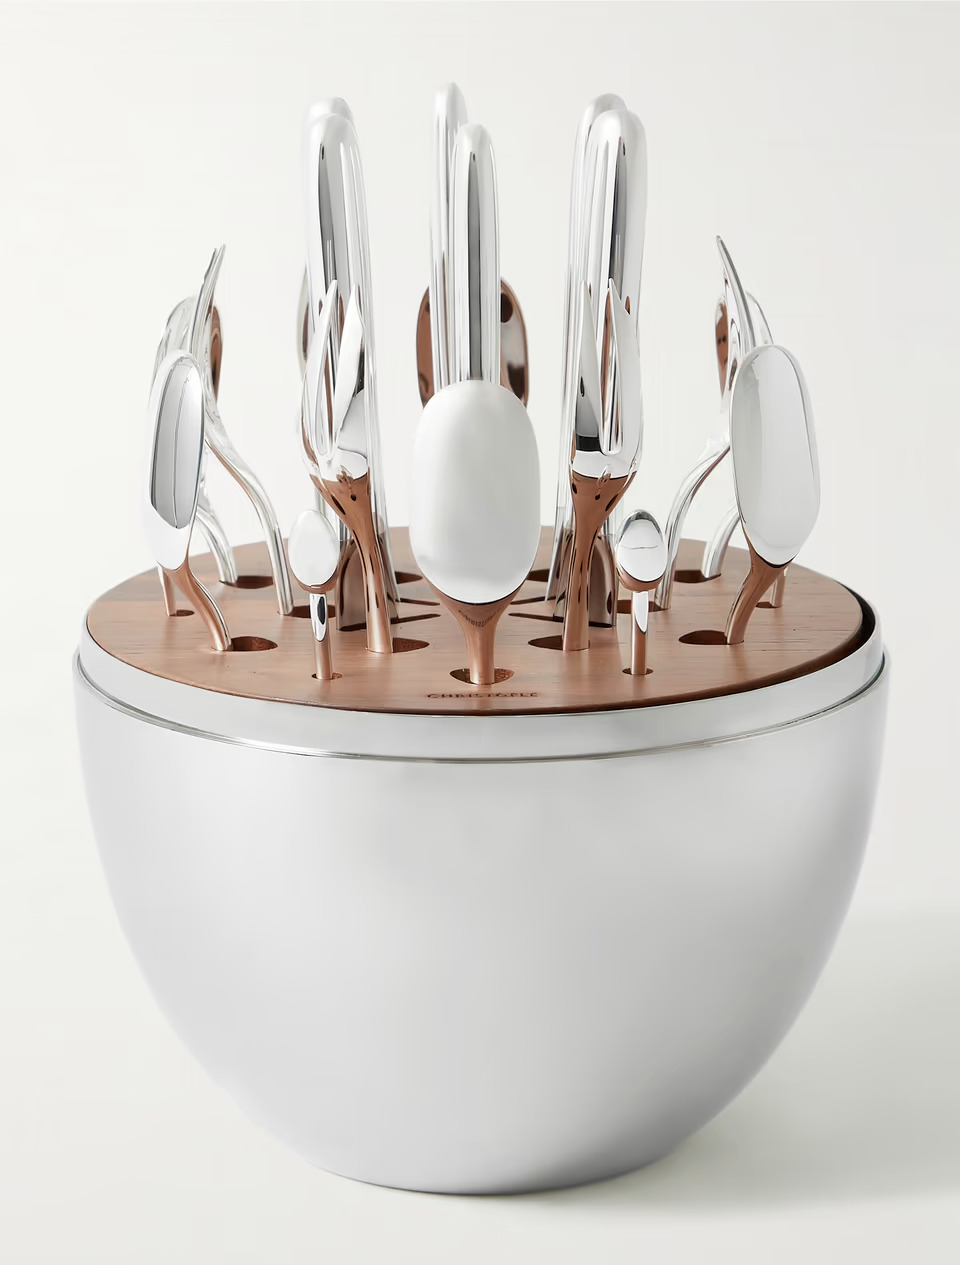 CHRISTOFLE MOOD PARTY SILVER PLATE 25-PIECE SET W EGG CAPSULE #0065599 BRAND NI